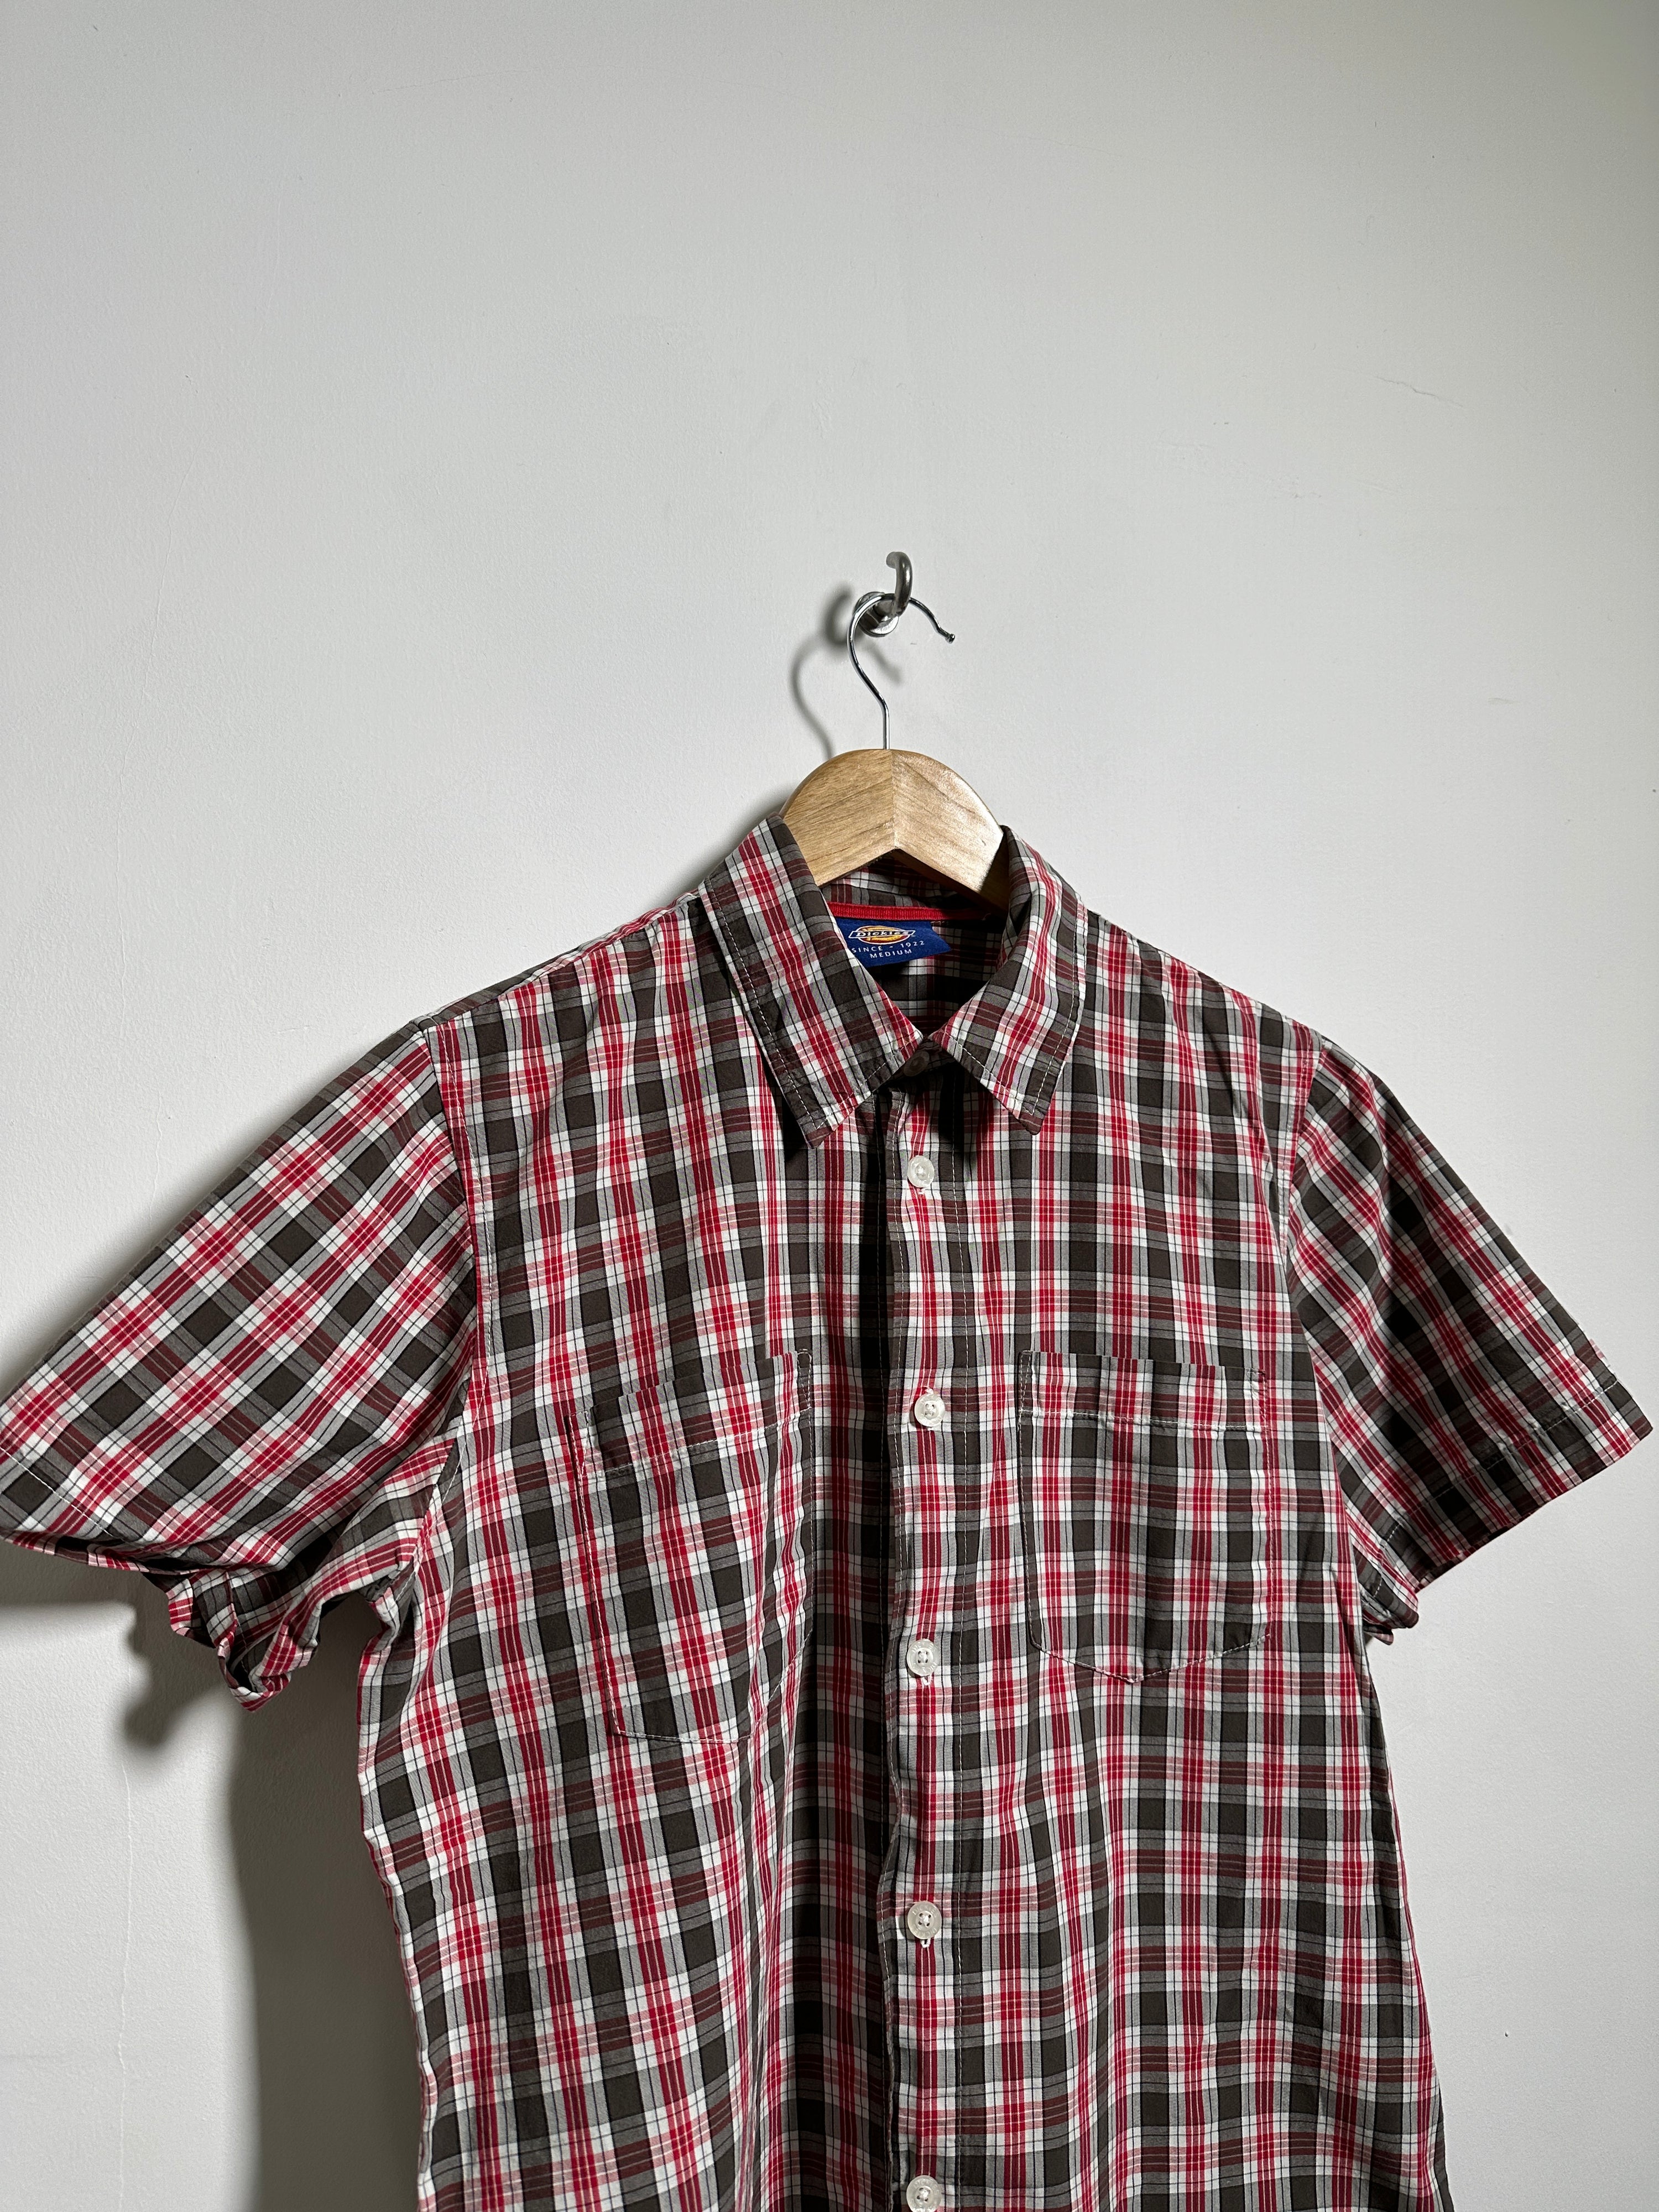 DICKIES short-sleeve shirt in checked red, white and grey